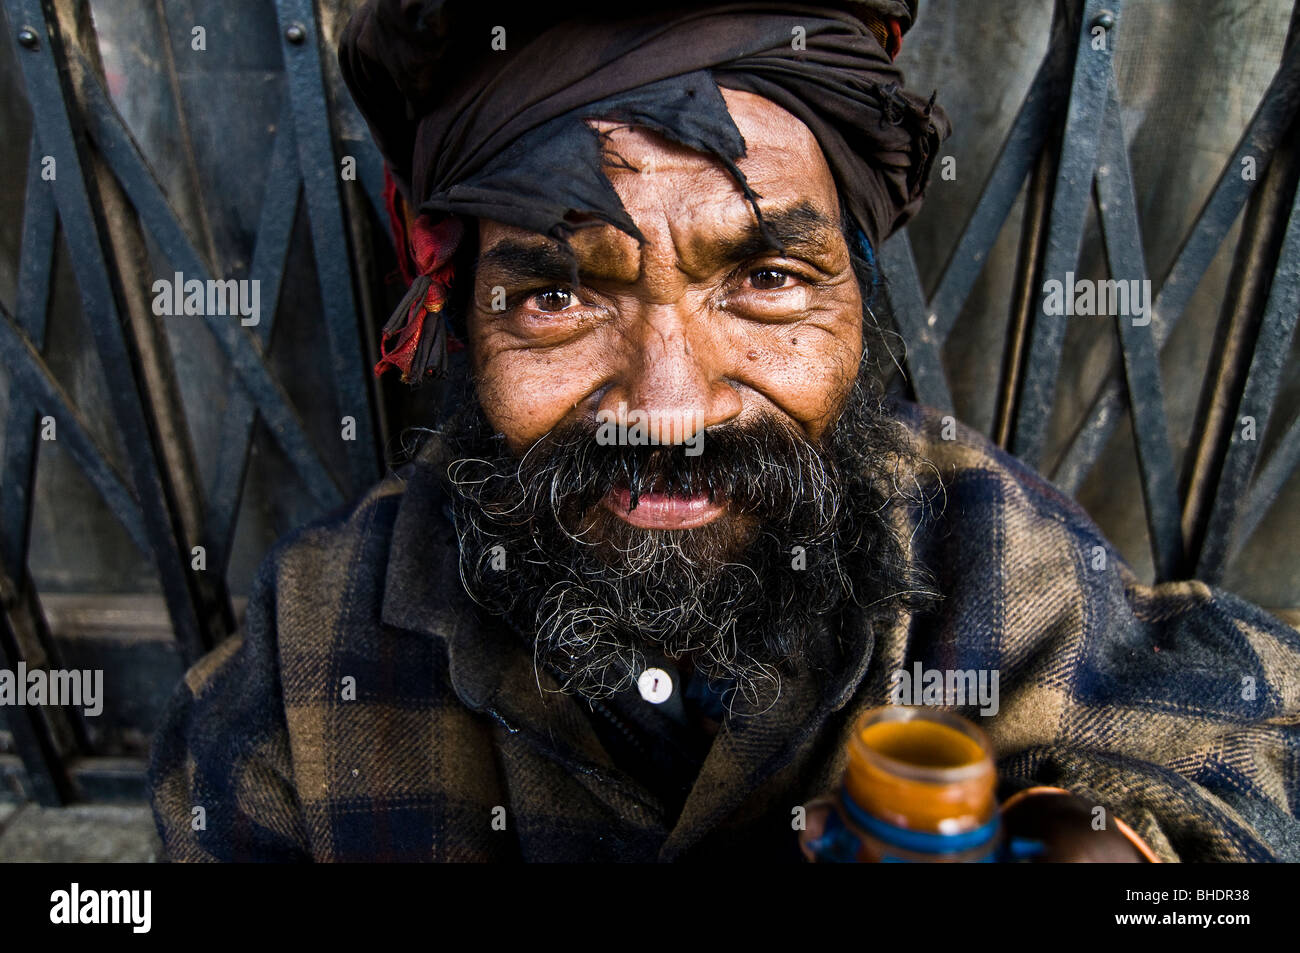 A smiling beggar / pirate . Stock Photo